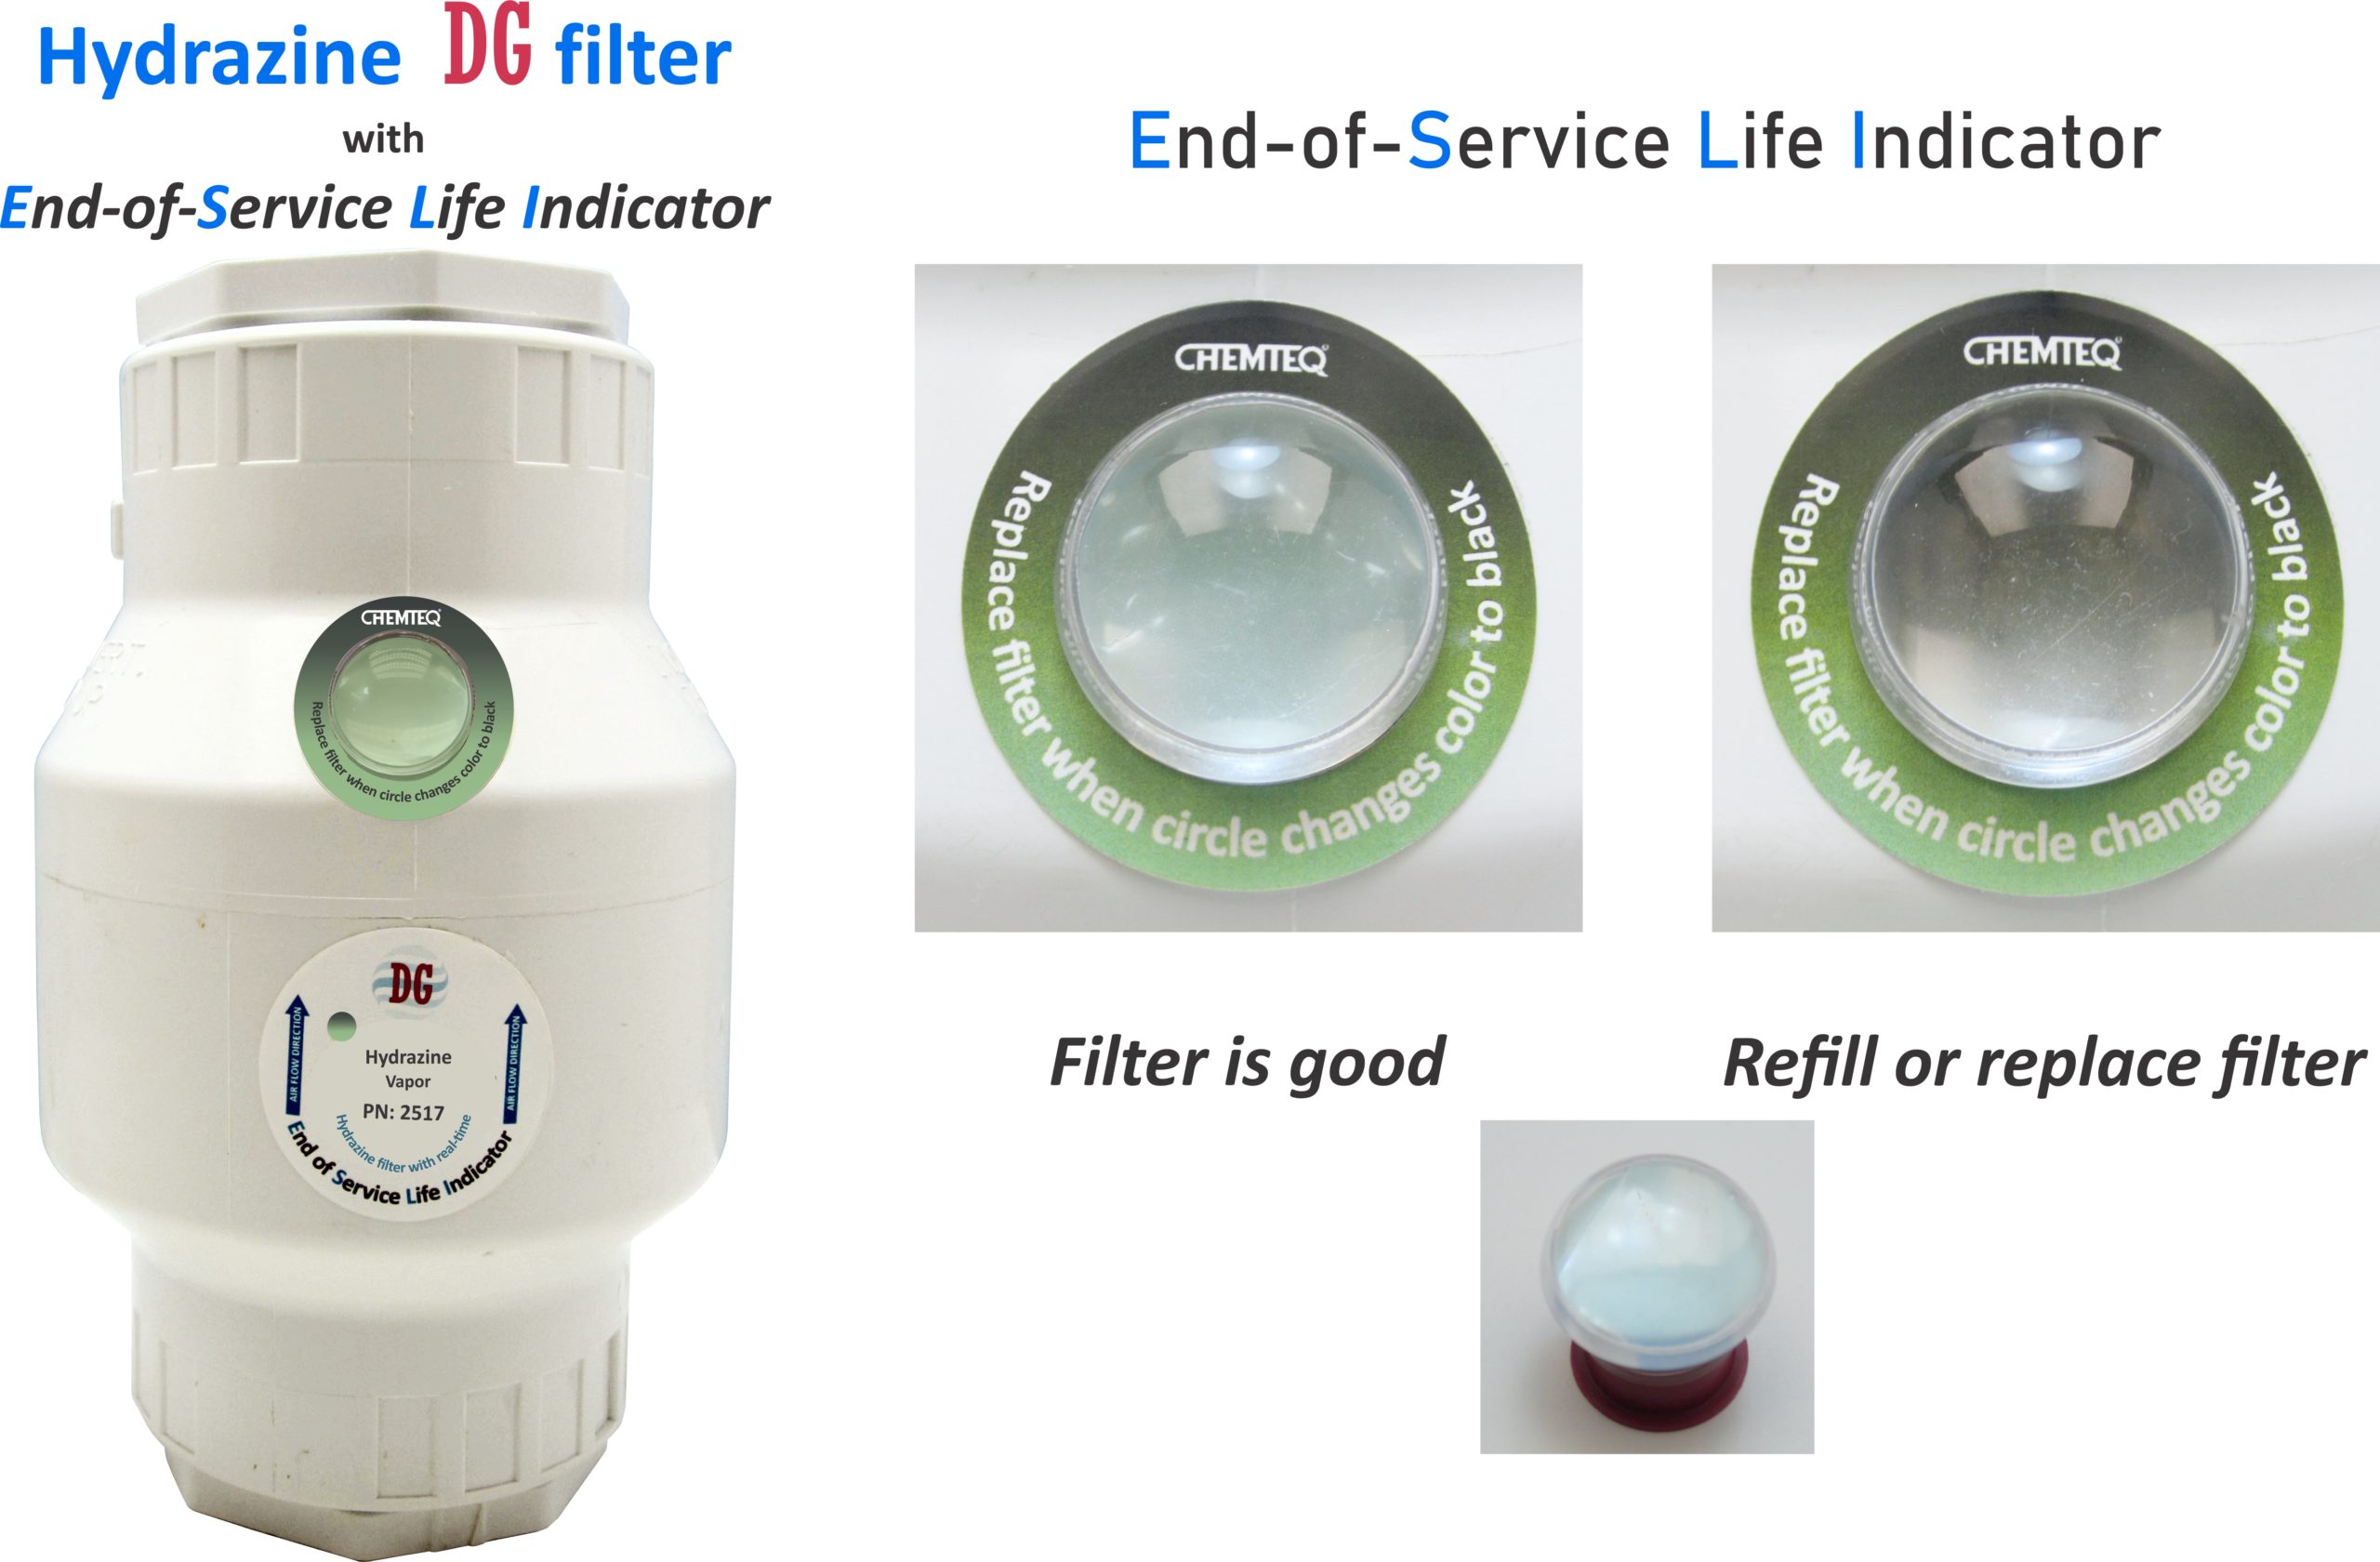 Hydrazine DG Filter 2517 with end-of-service life indicator